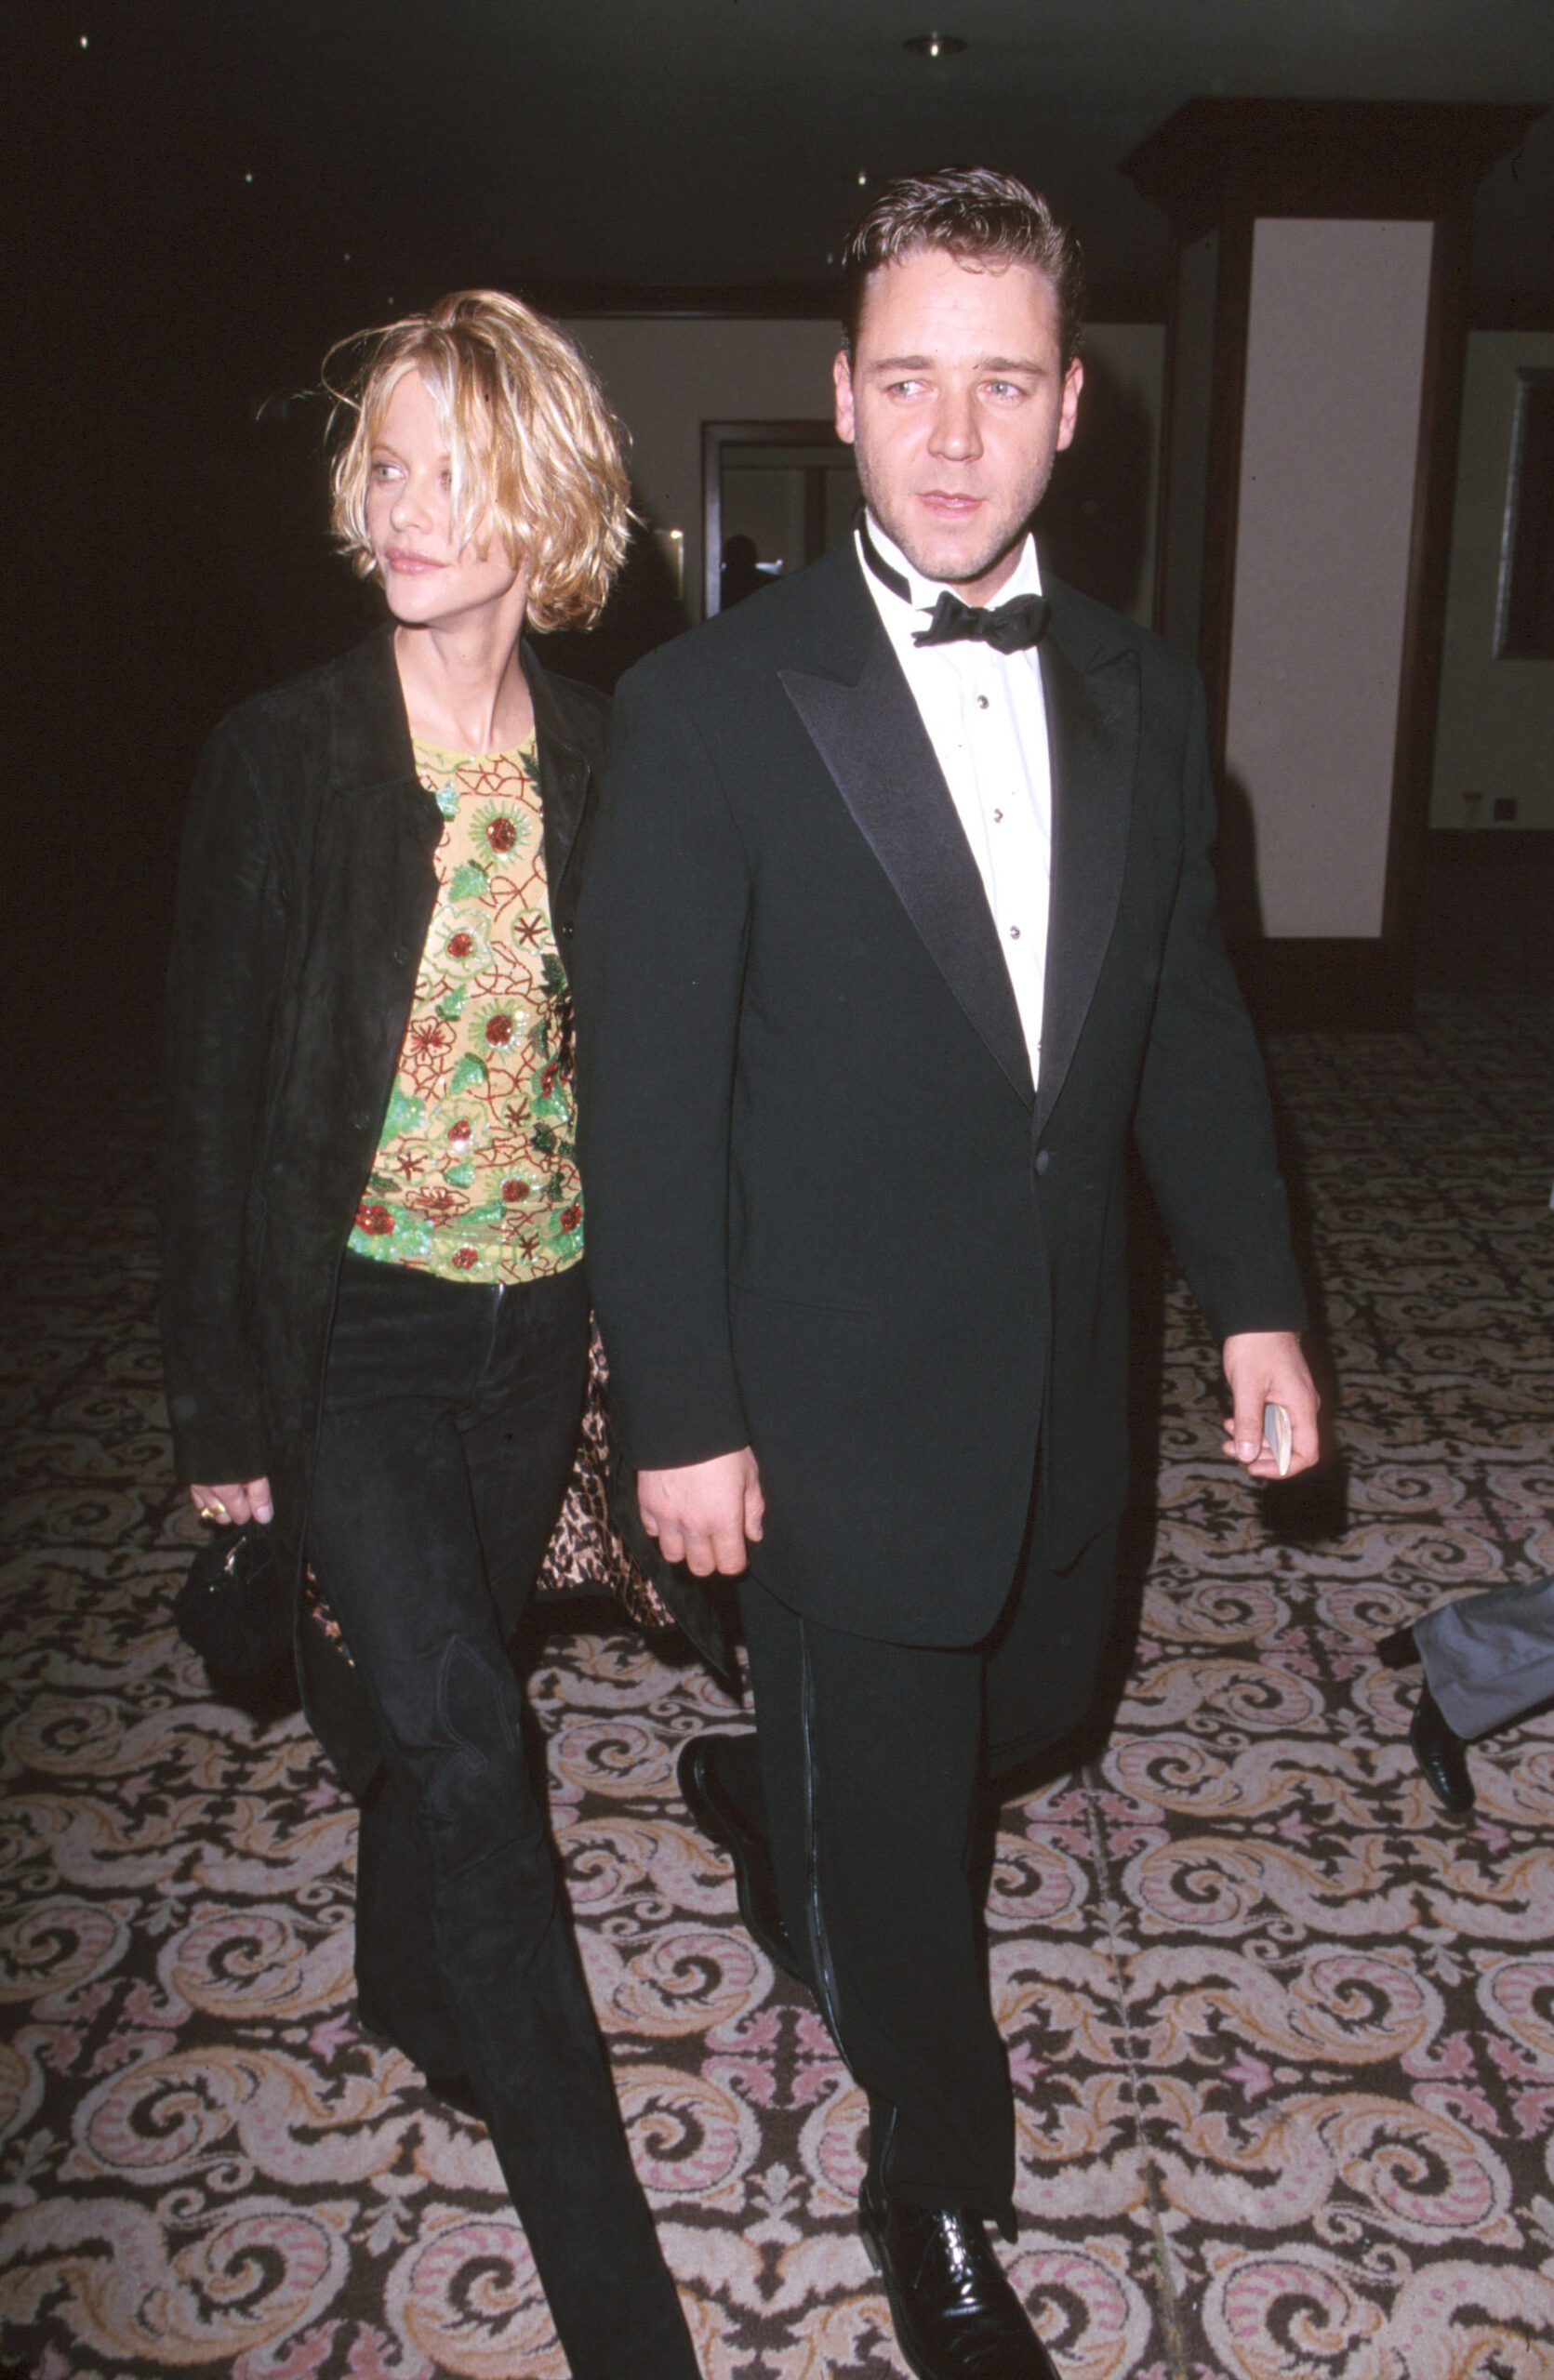 Meg Ryan and Russell Crowe on March 11, 2000, in California | Source: Getty Images